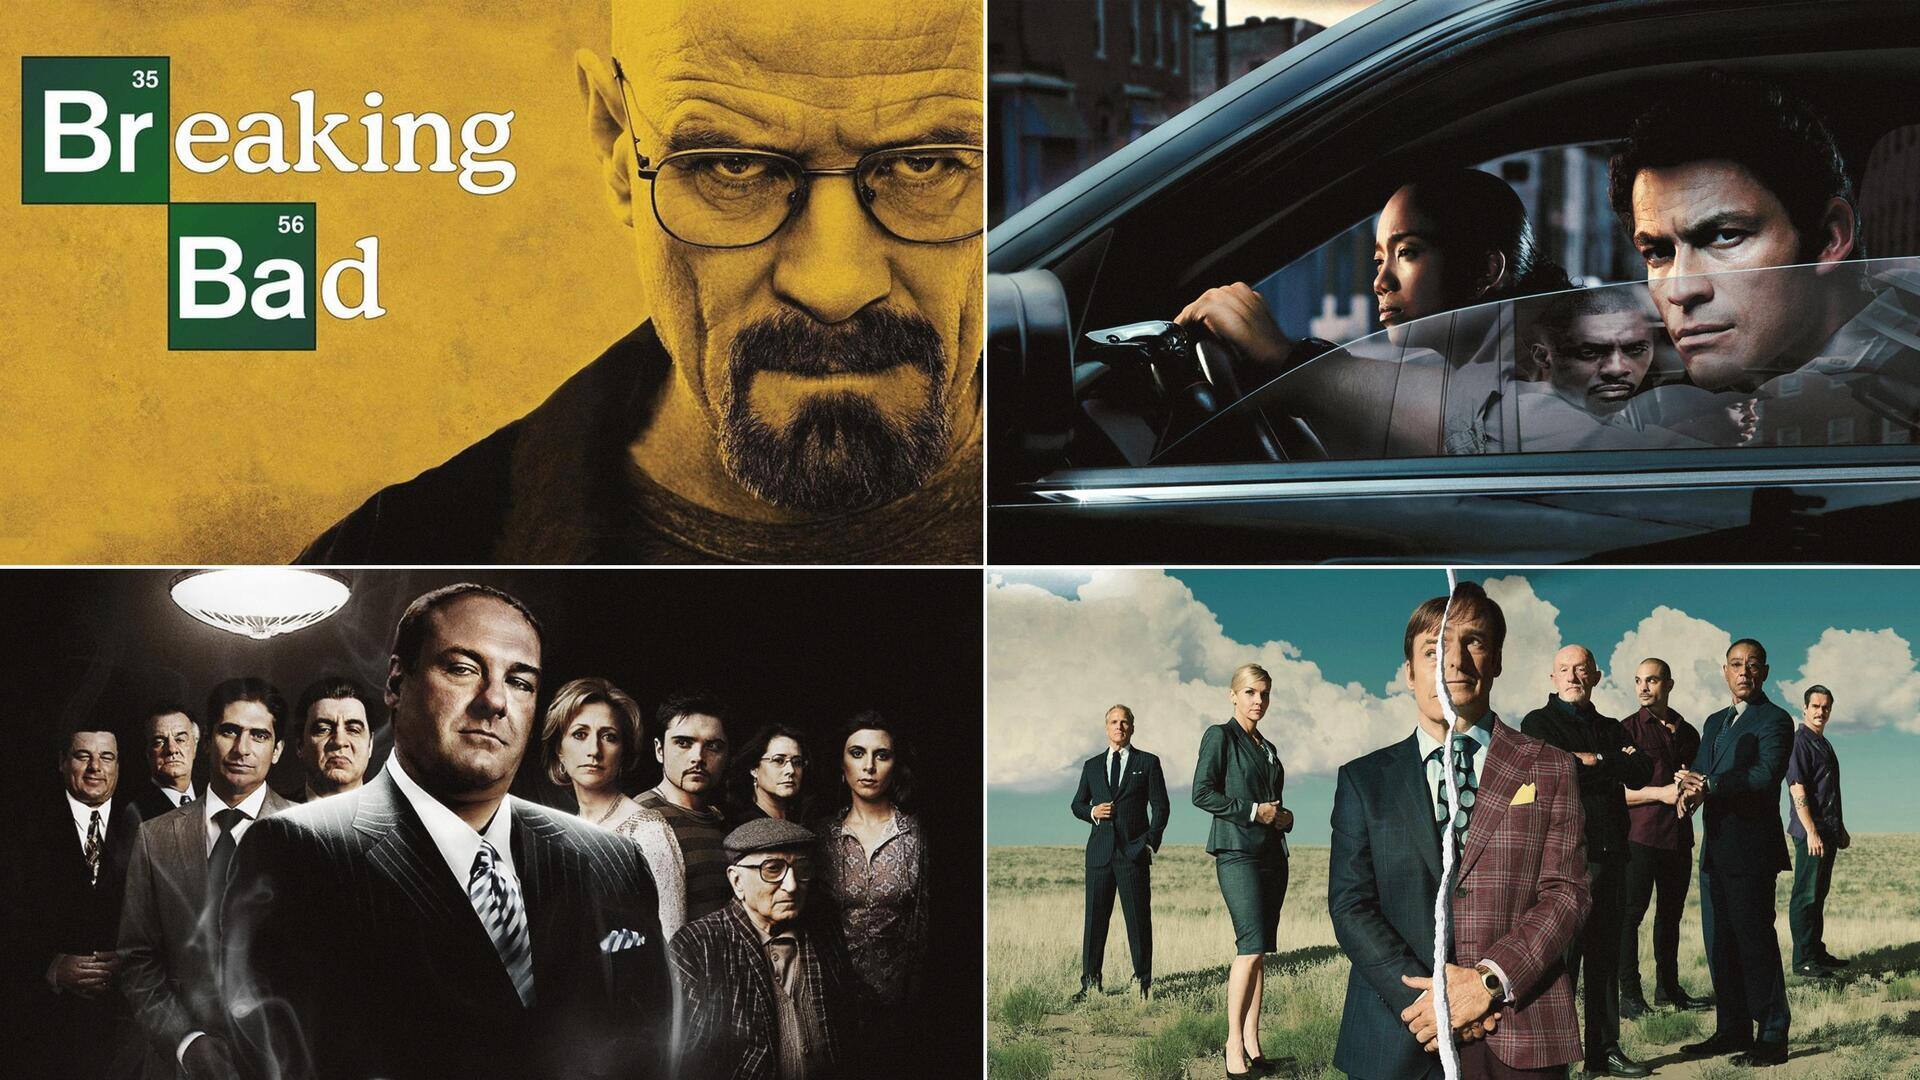 If you like 'Breaking Bad,' watch these similar crime-drama shows